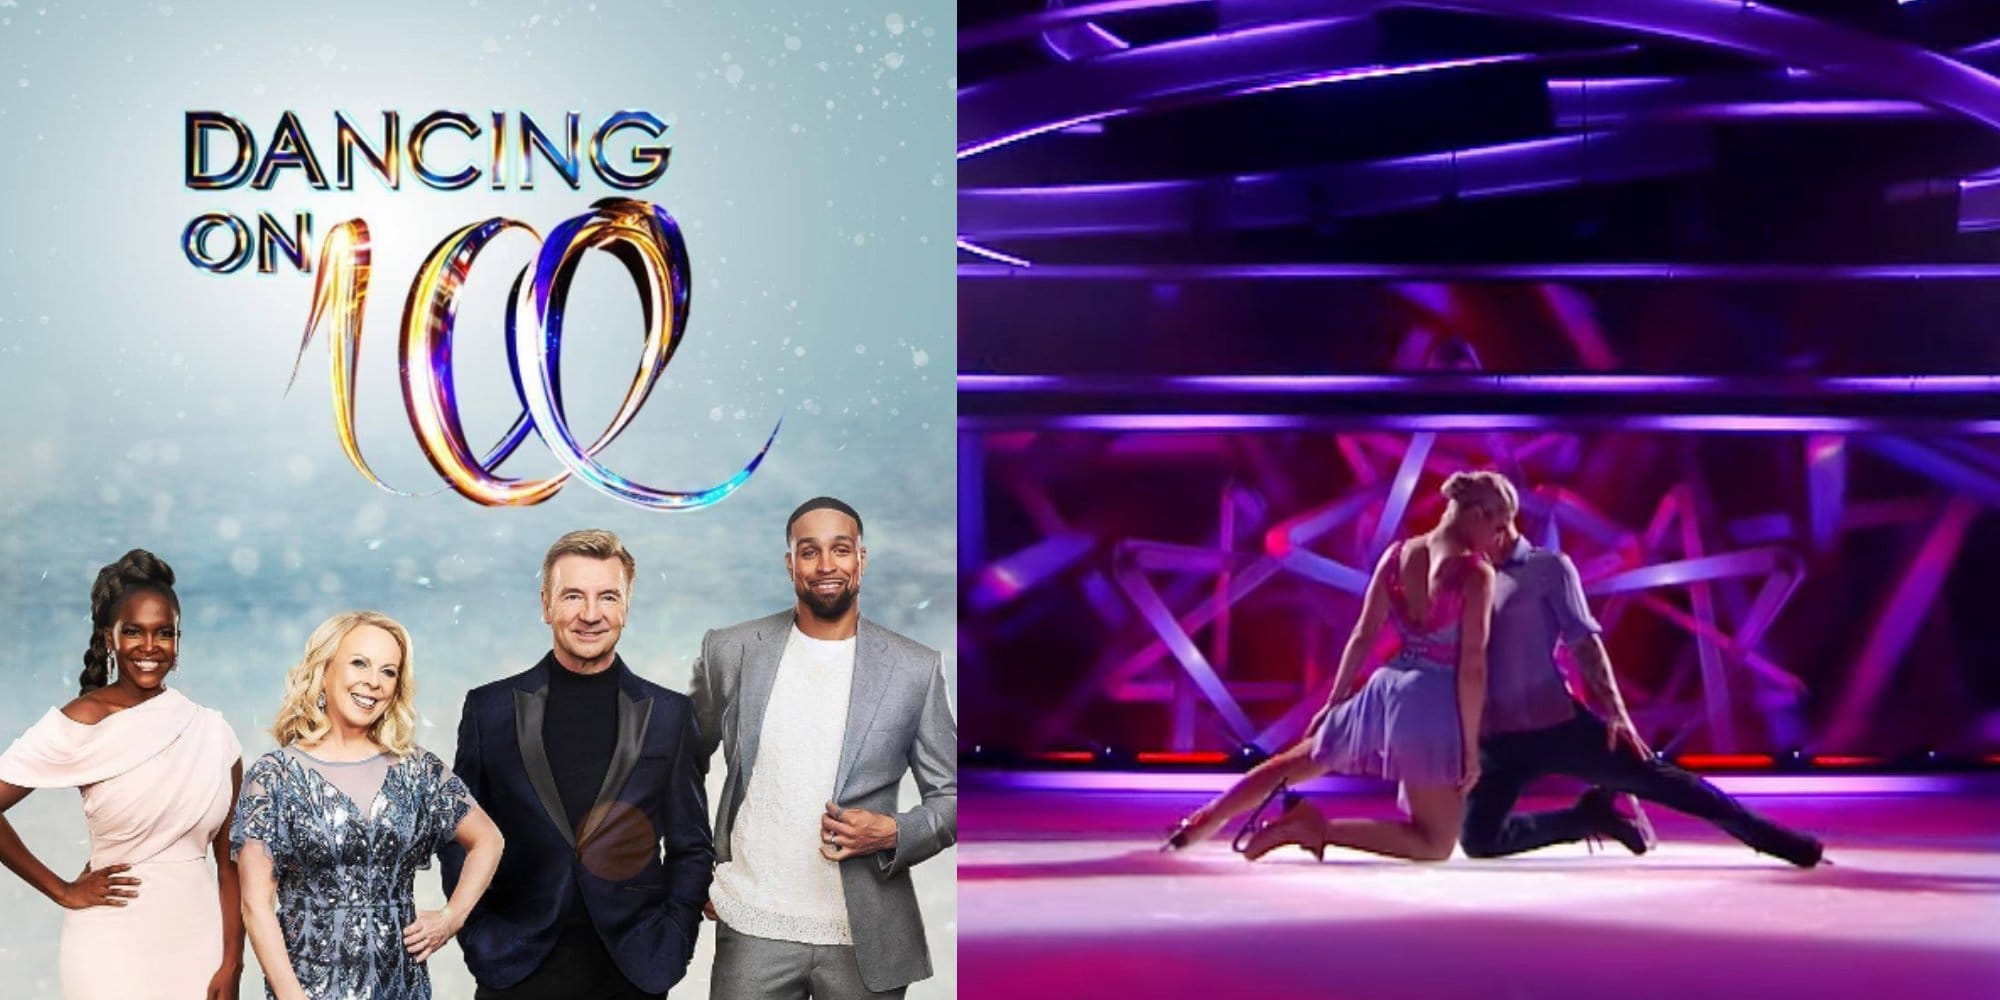 Dancing On Ice Season 16 Episode 1: Release Date, Spoilers & Where To Watch